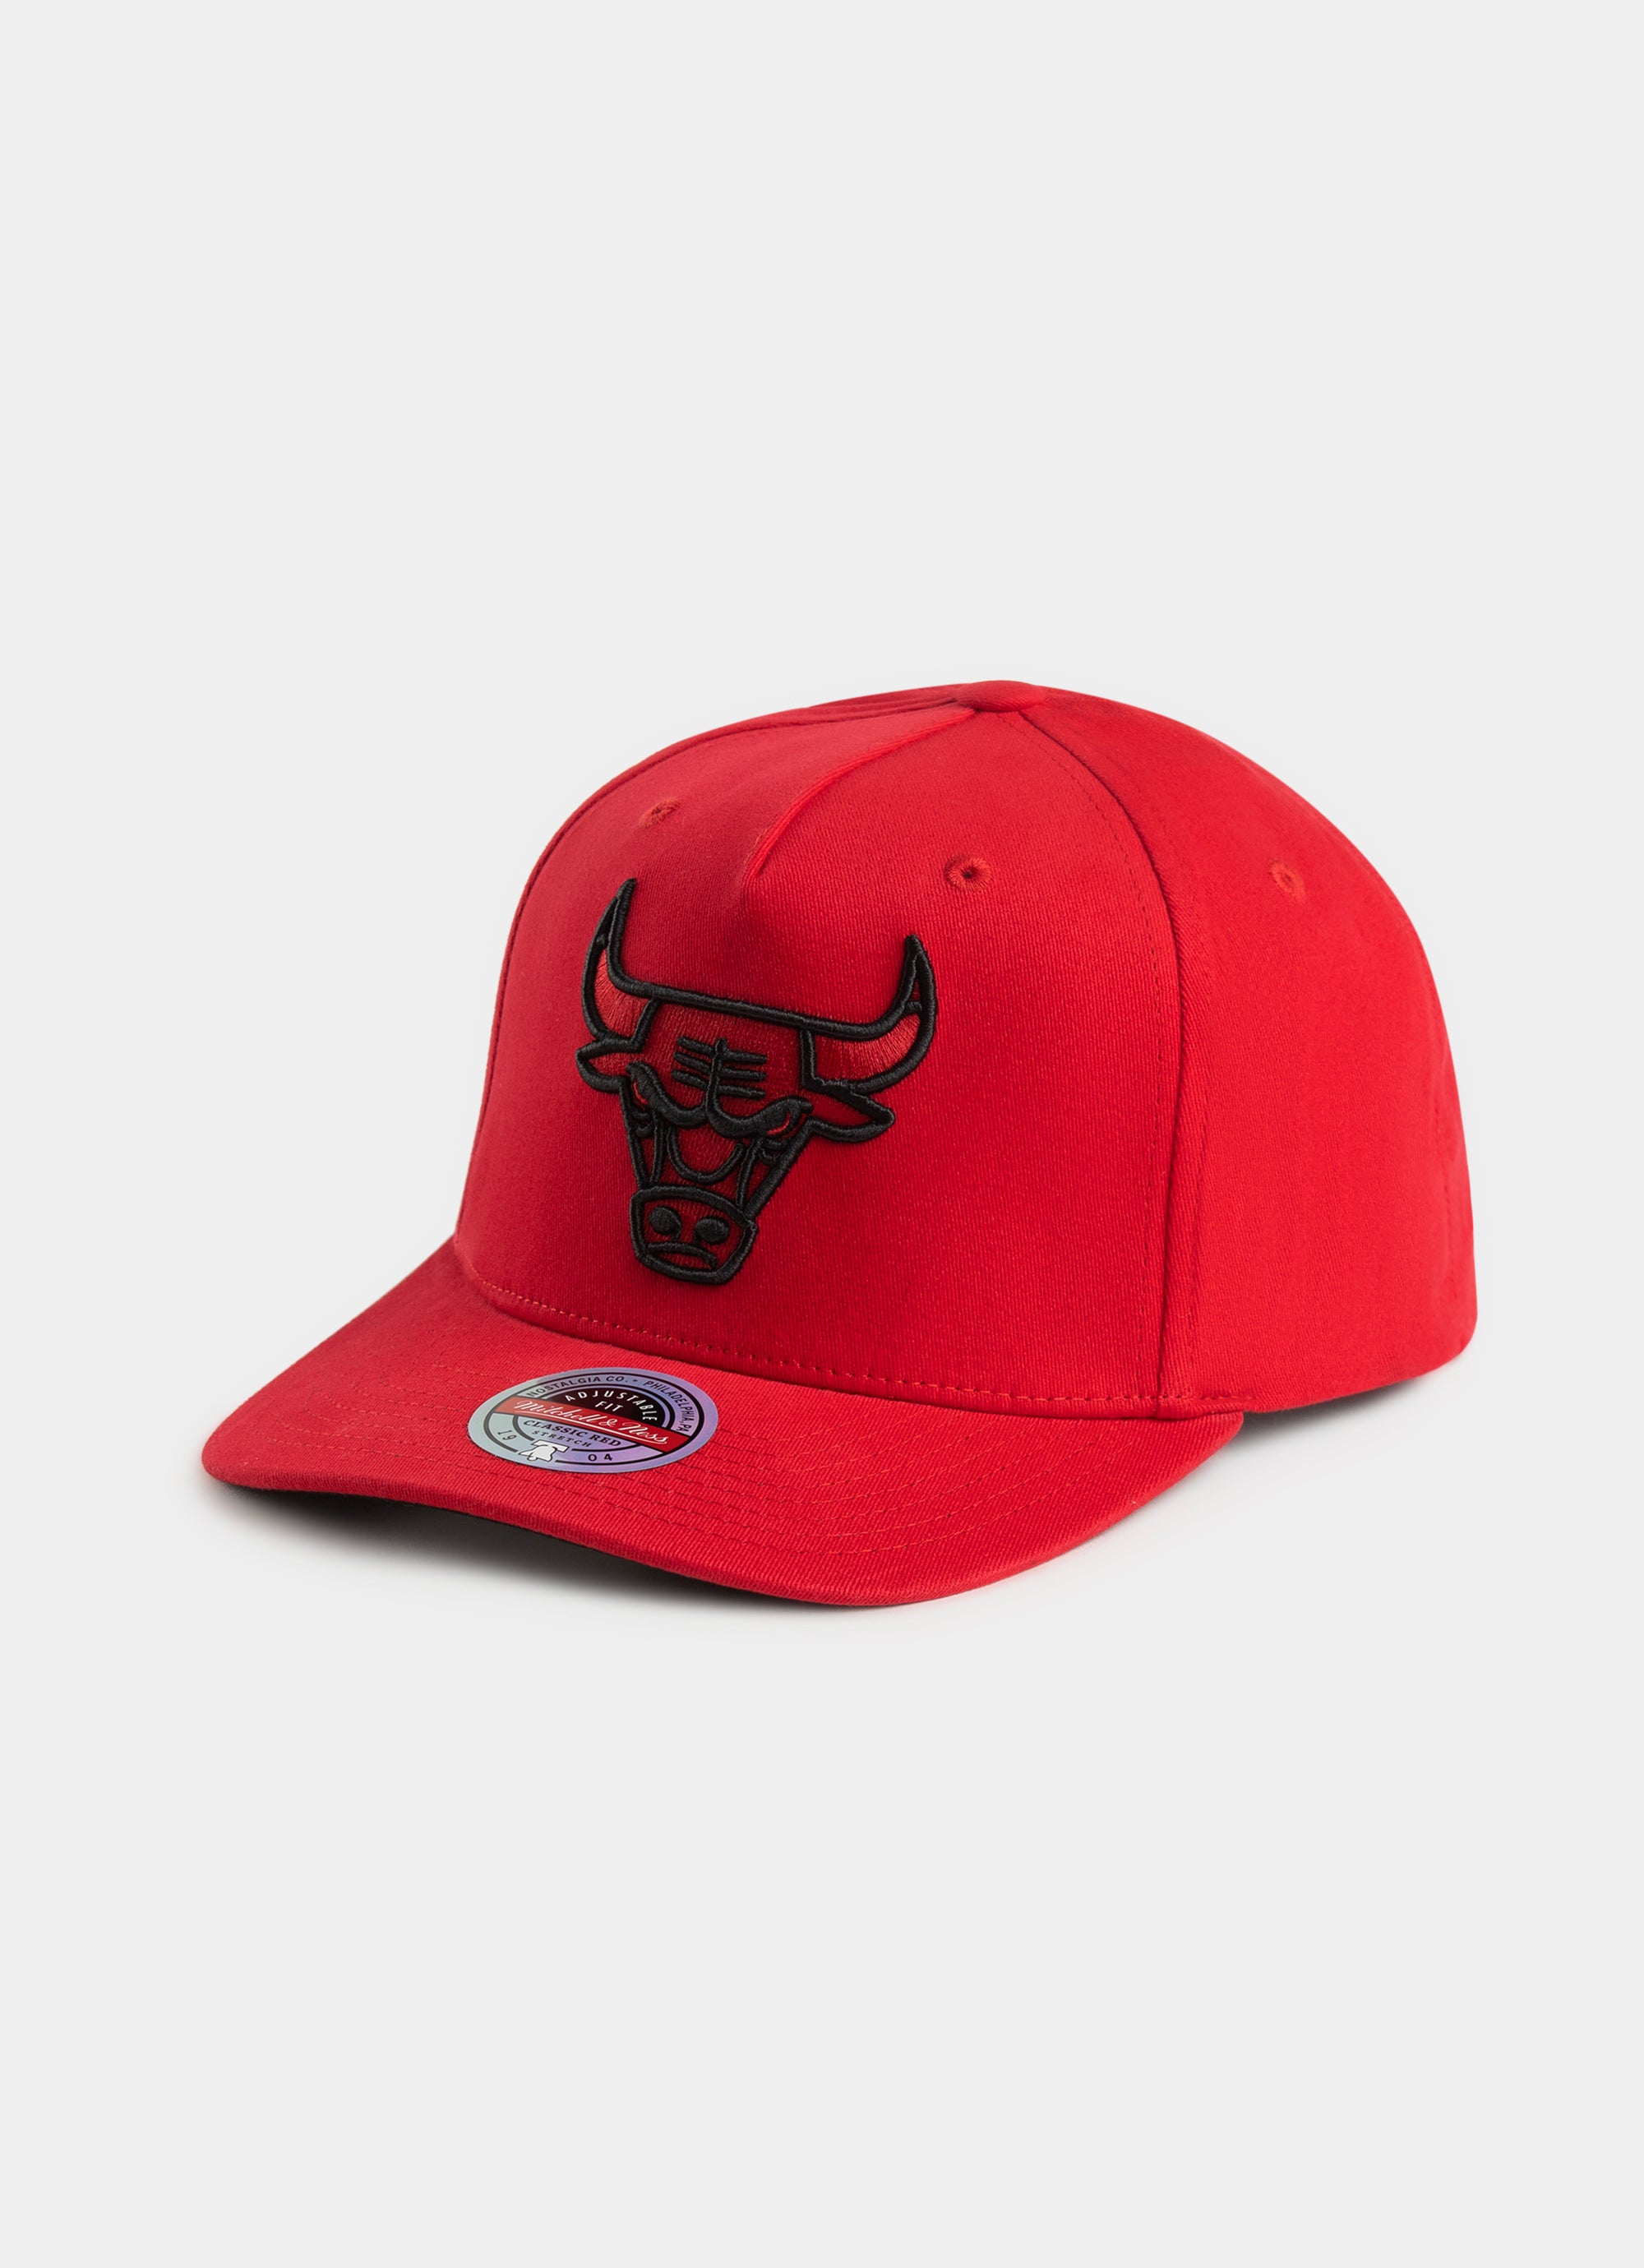 Mitchell & Ness - NBA Red Snapback Cap - Chicago Bulls All Directions Red Snapback @ Hatstore